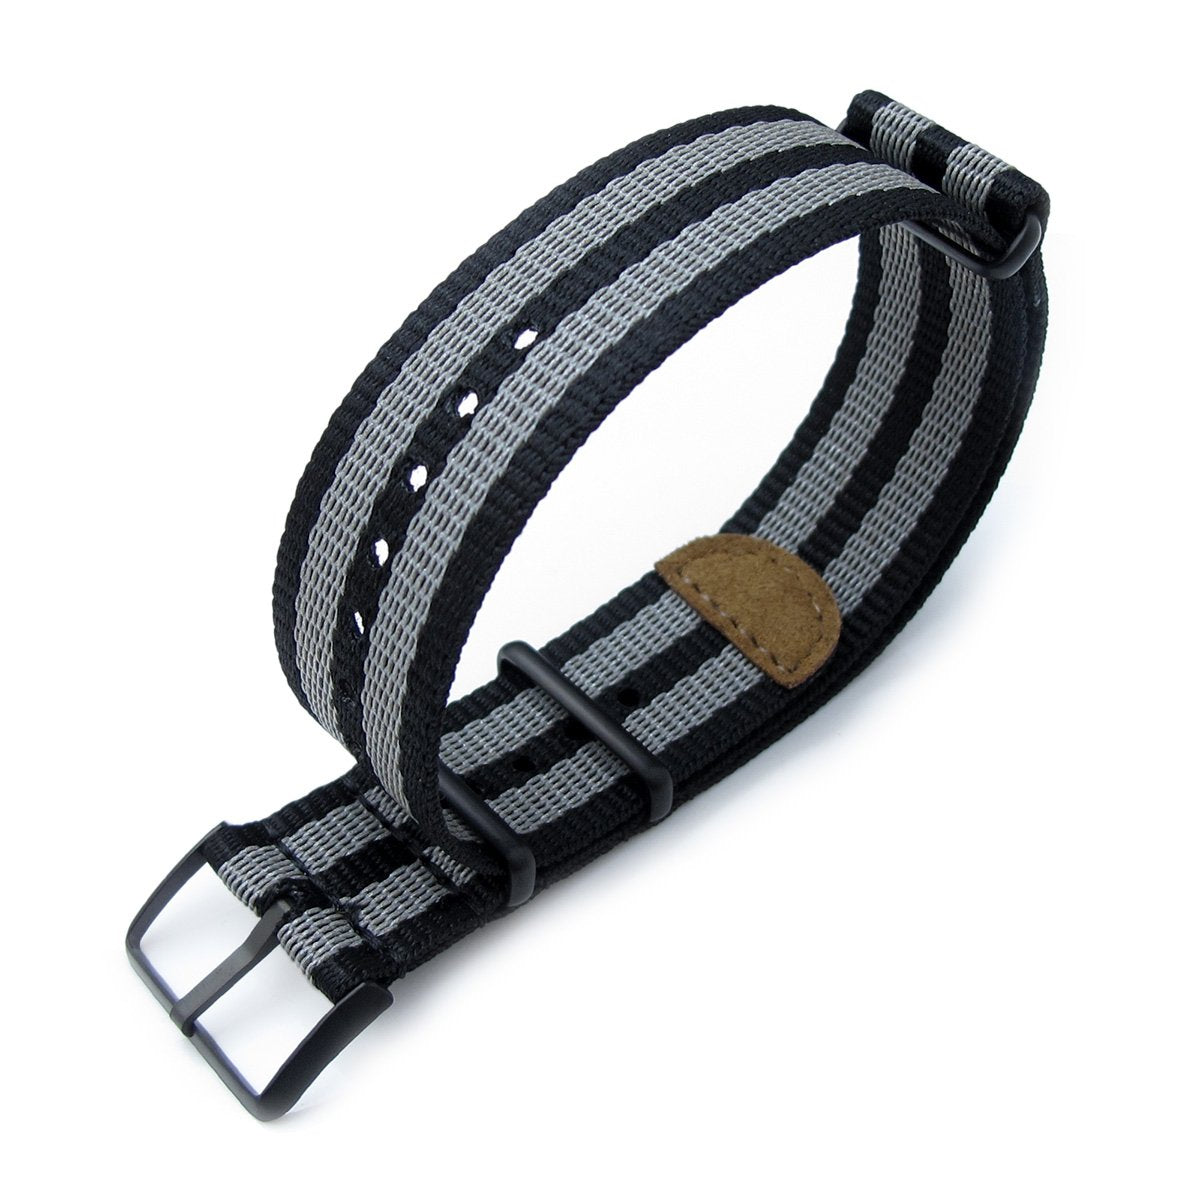 MiLTAT 20mm or 22mm G10 NATO 3M Glow-in-the-Dark Watch Strap PVD Black Black and Grey Stripes Strapcode Watch Bands